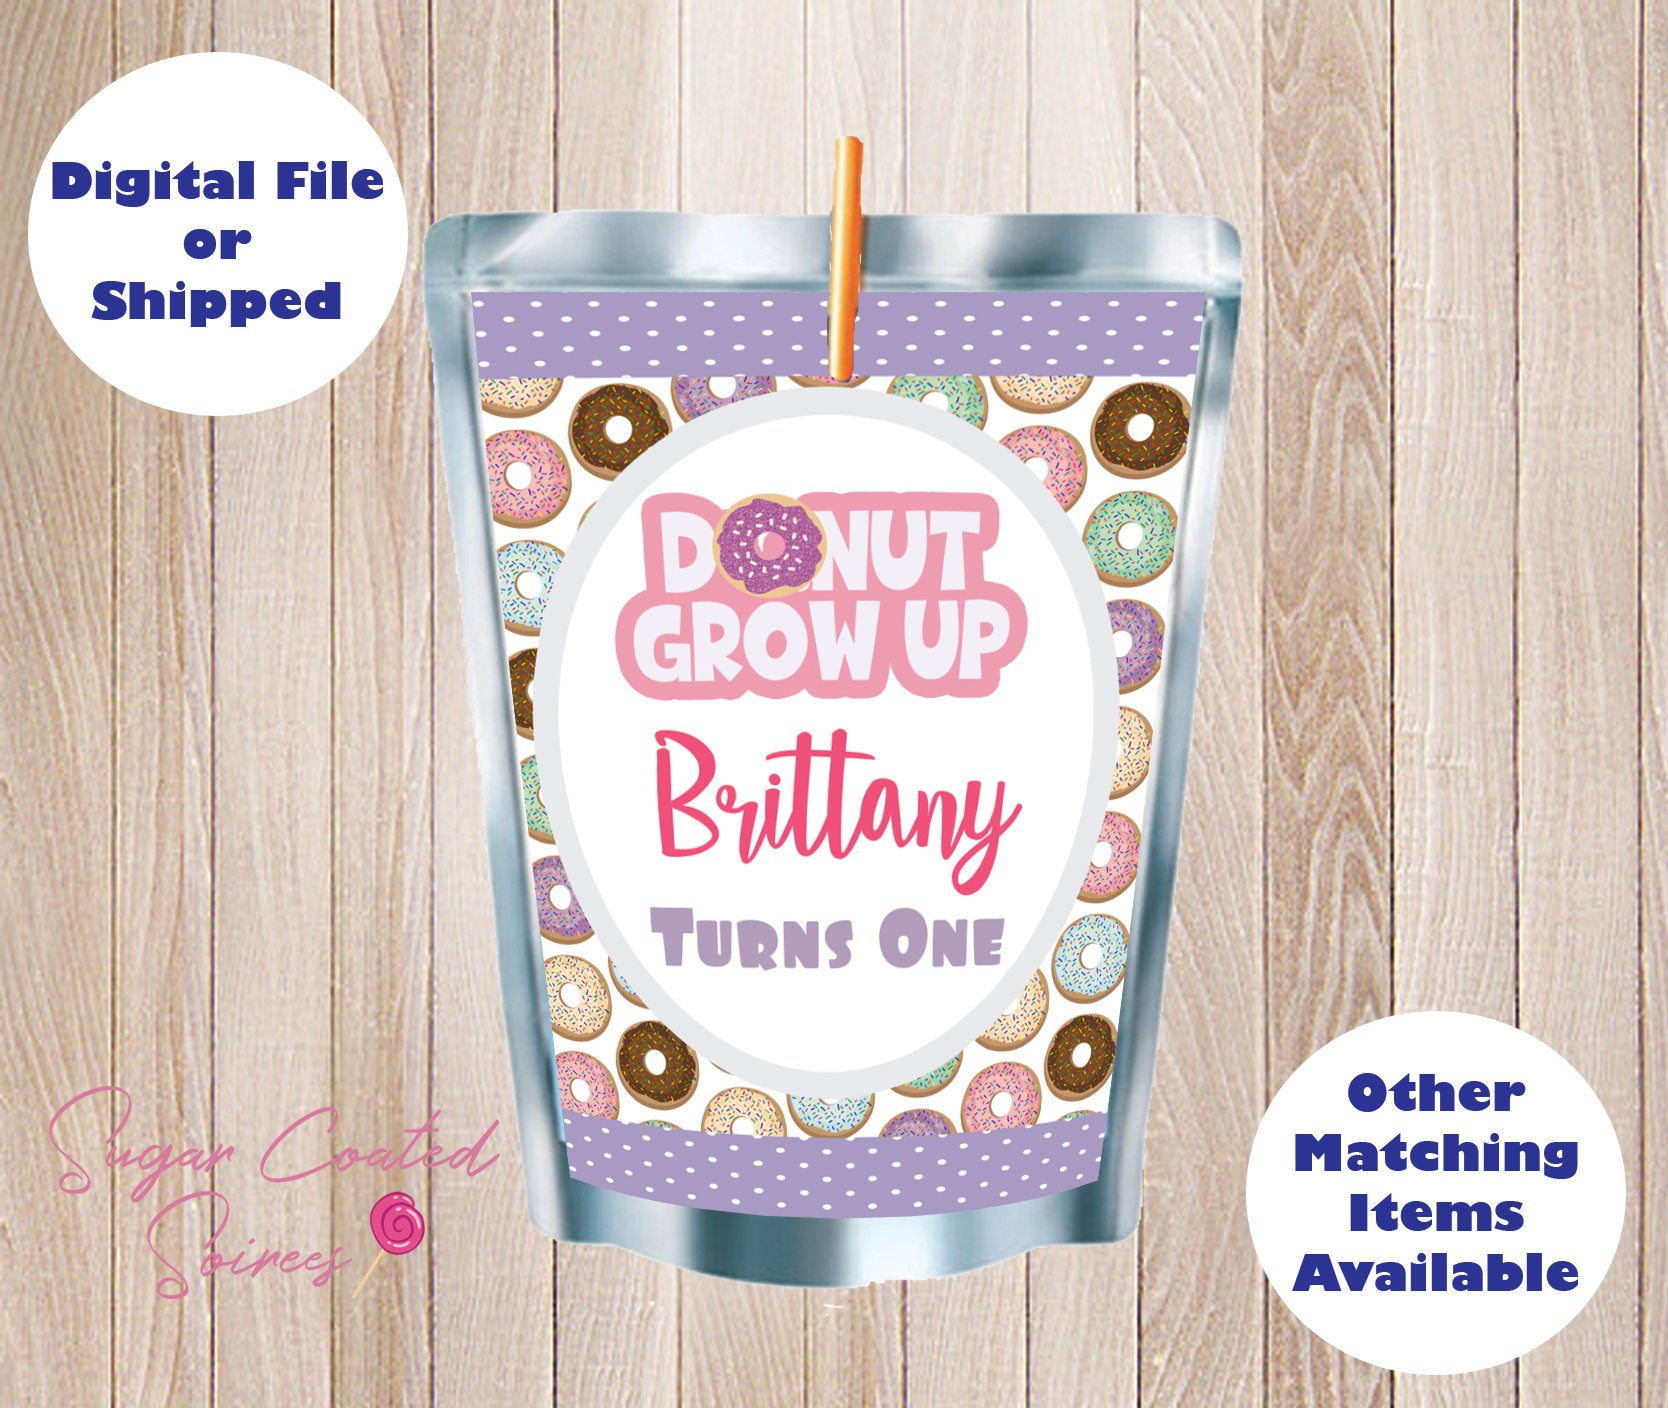 PRINTED and SHIPPED Donut Grow Up first birthday, Girls Party Personalized Capri Sun Juice Pouch Label, Birthday Party, Favor, DIY